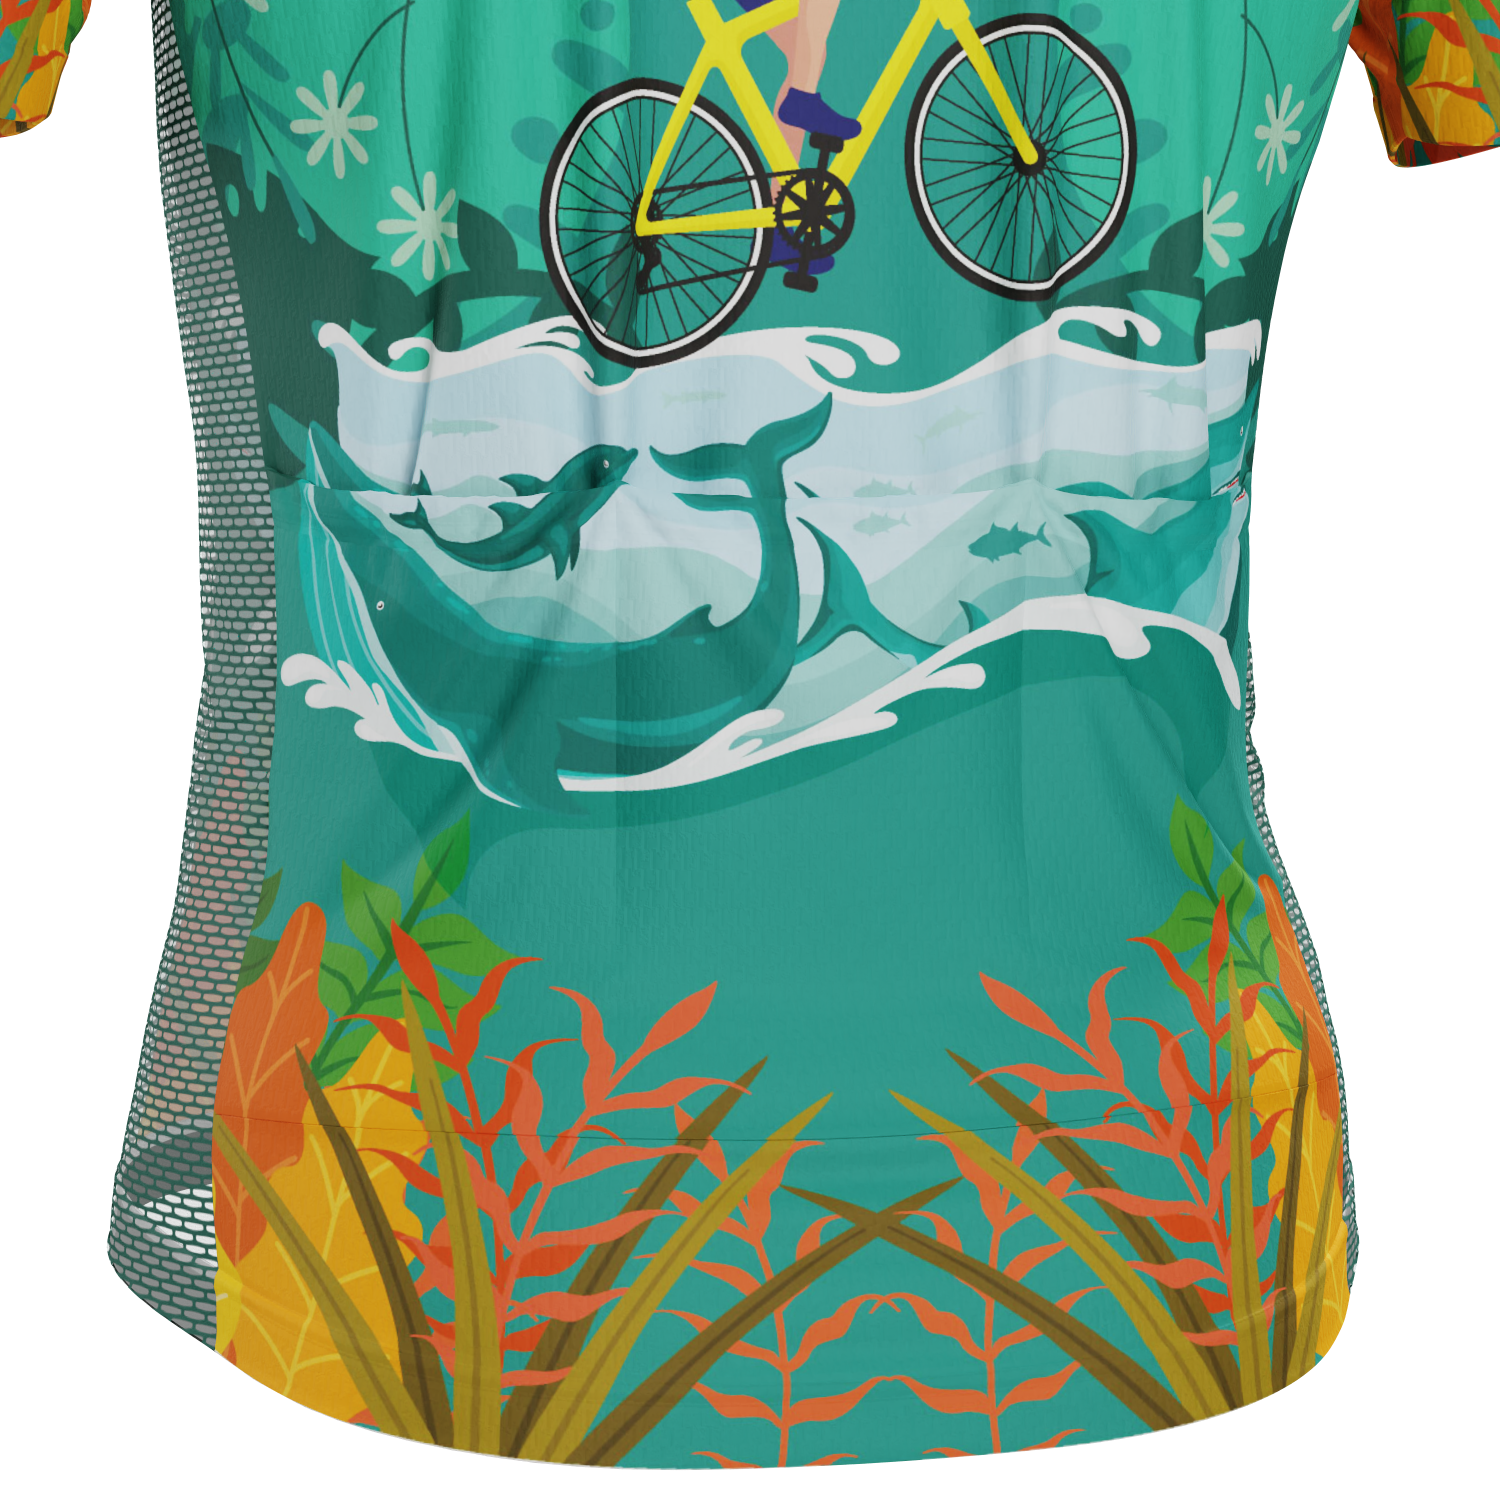 Men's Bikes Save The World Short Sleeve Cycling Jersey